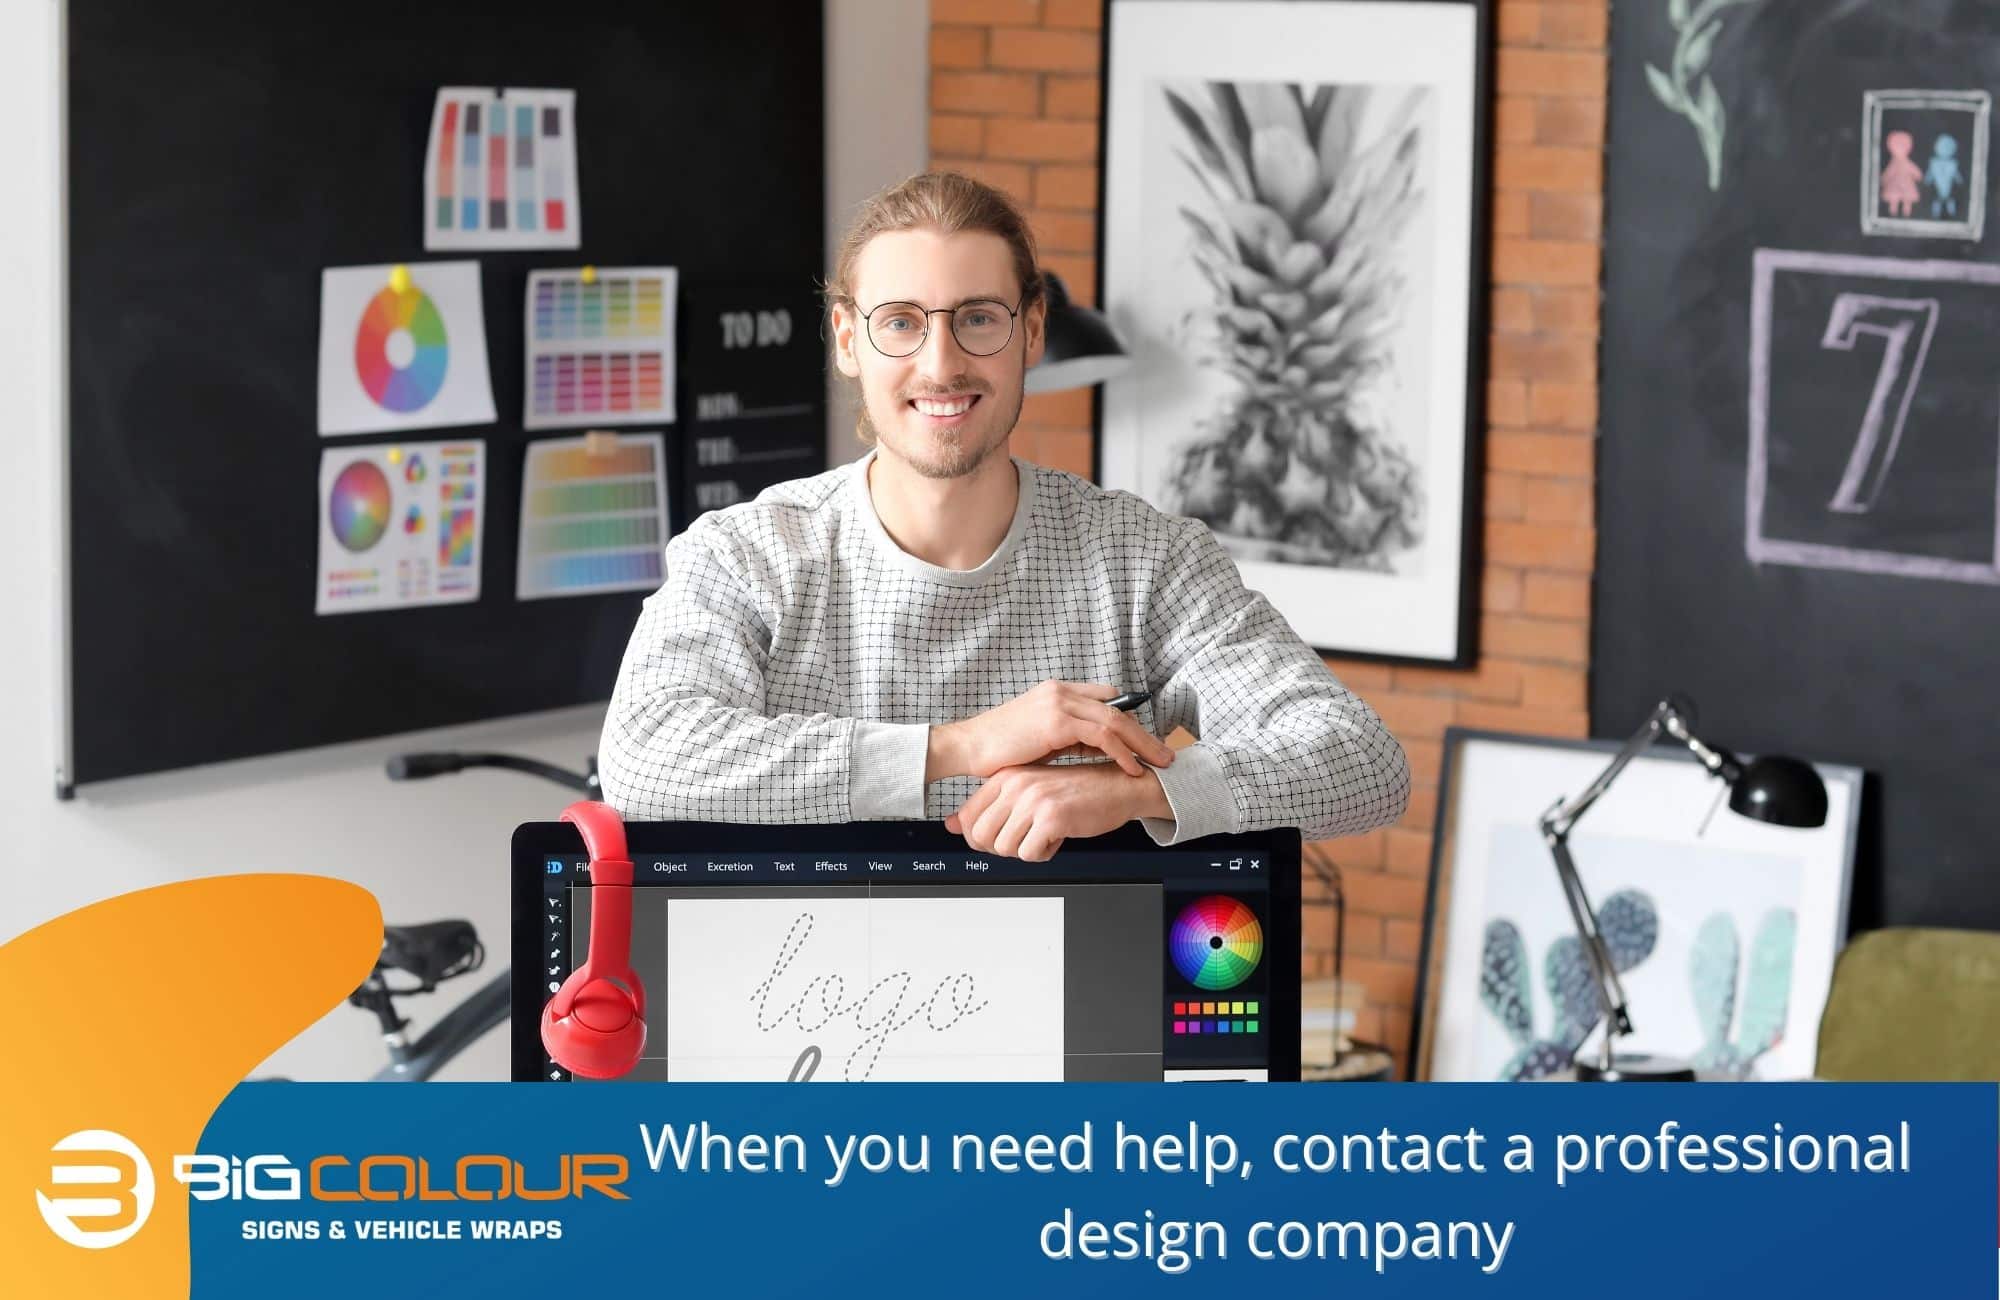 When you need help, contact a professional design company